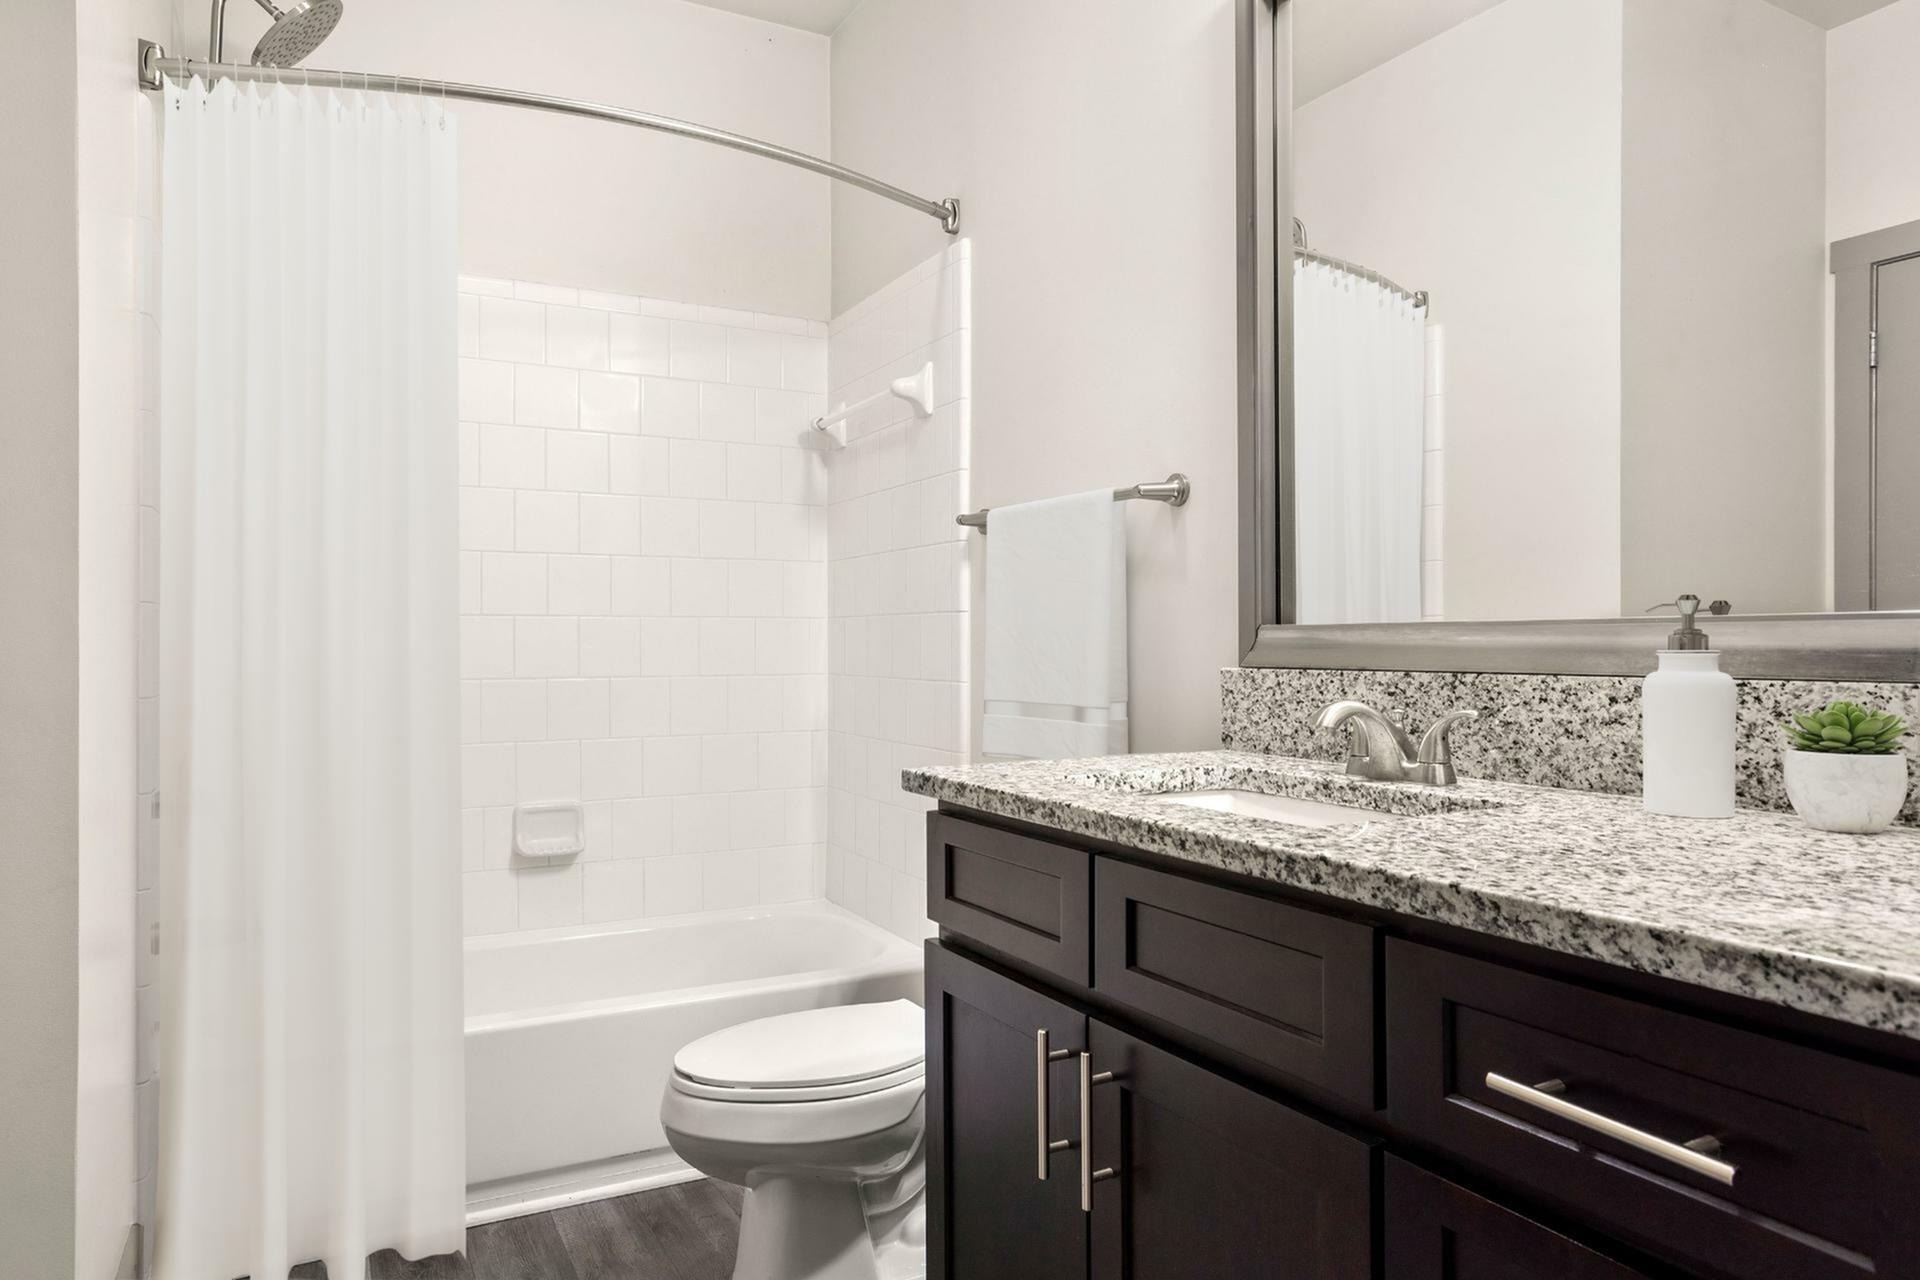 Bathroom | Apartments in Charlotte, NC | CityPark View